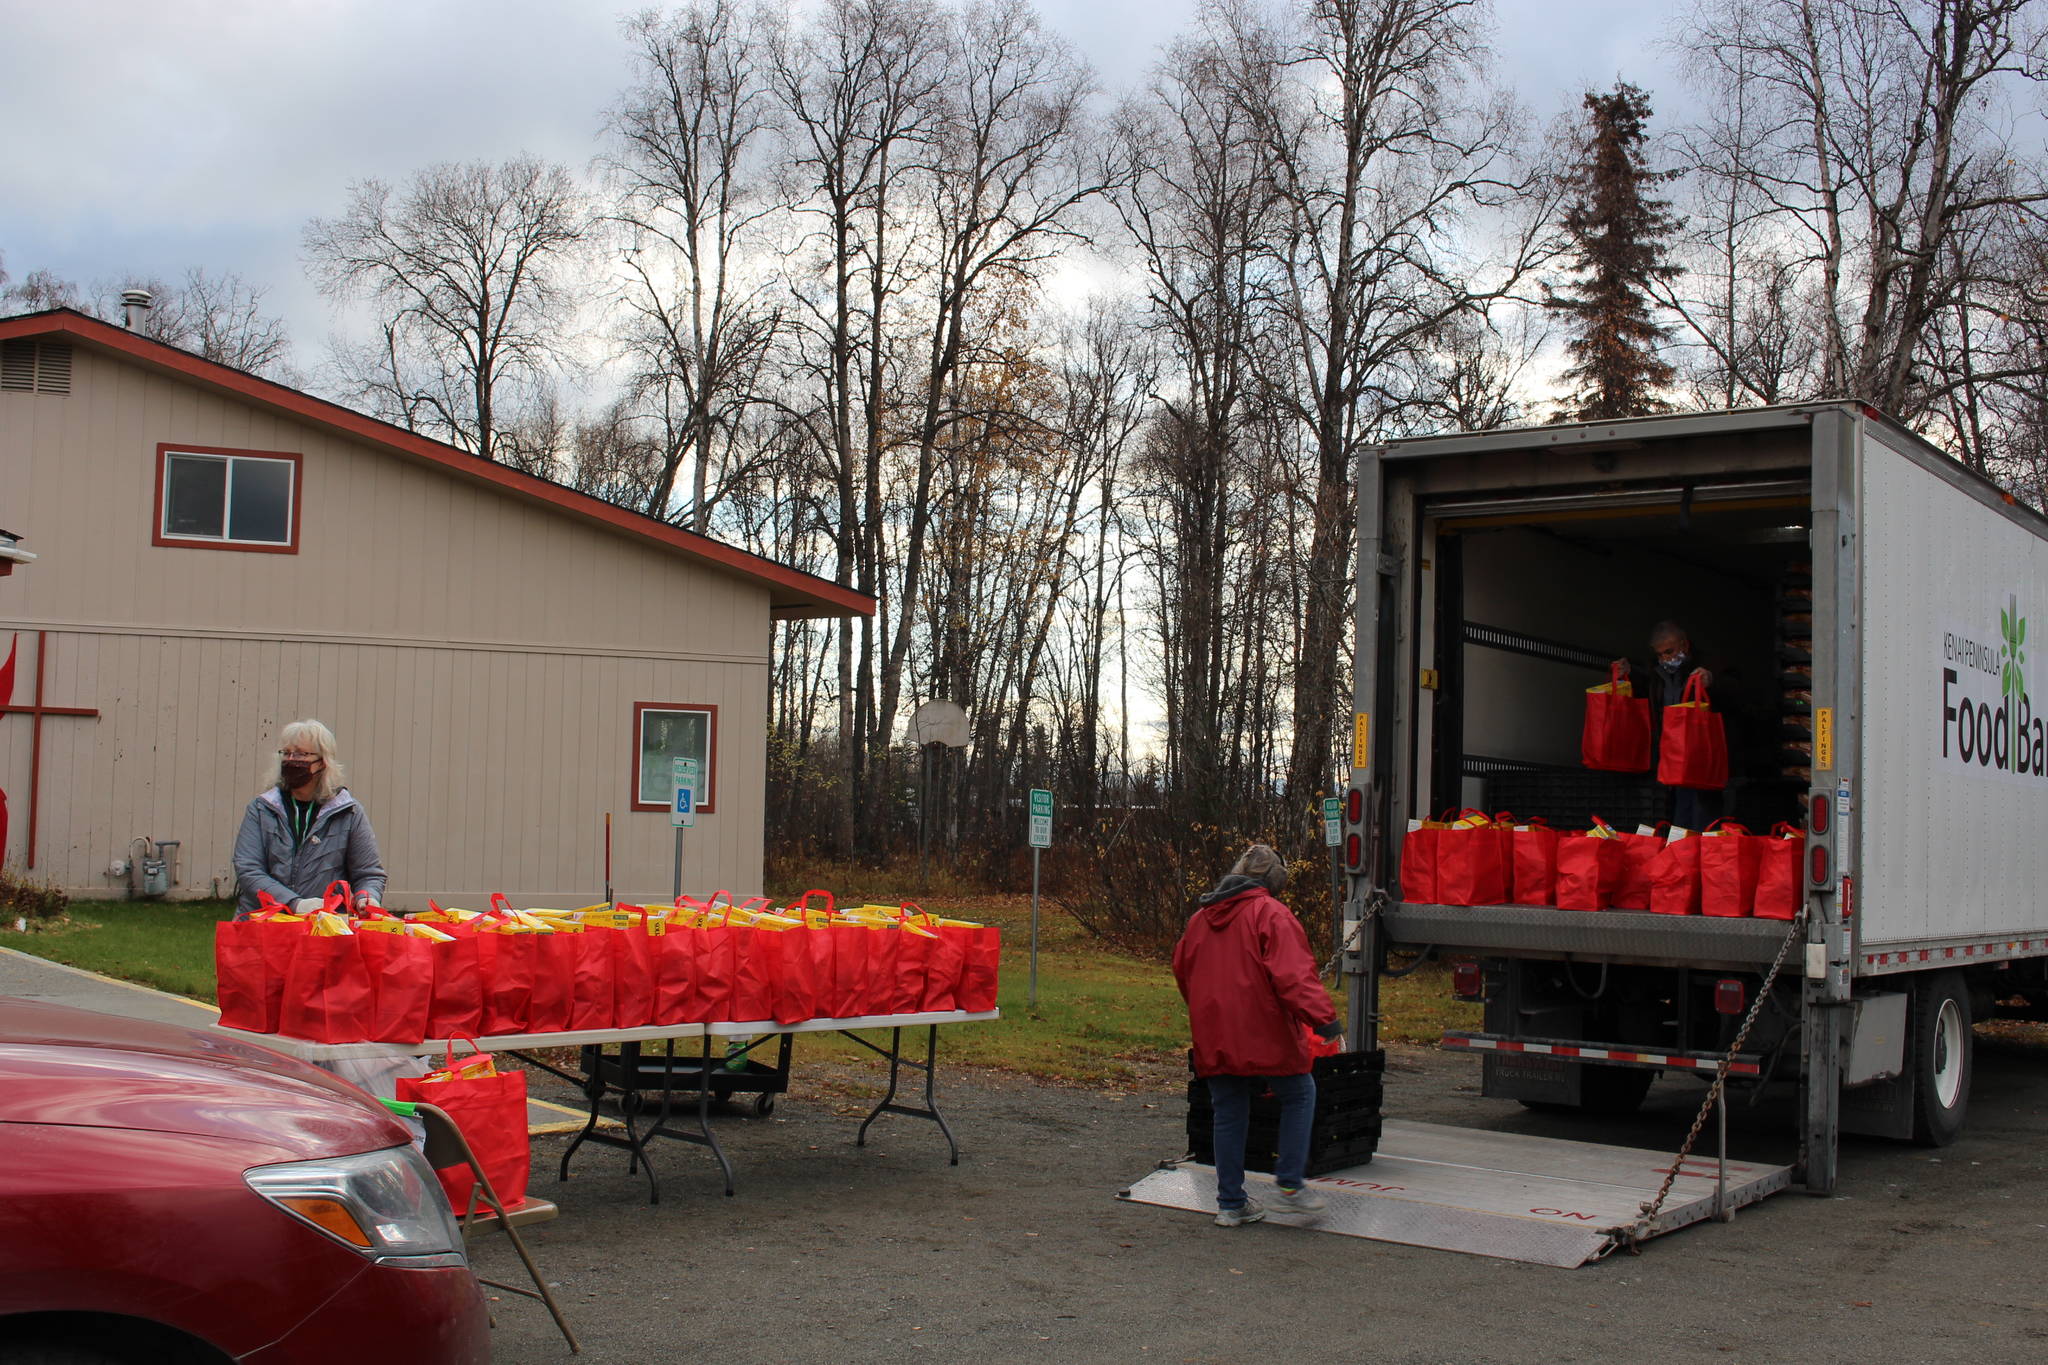 Volunteers distribute bags of food for Soldotna Residents thanks to a grant program from the city at the Soldotna United Methodist Church on Oct. 14, 2020. From left: Cosette Kilfoyle, Director of the Soldotna Food Pantry; Sandy Sandoval and Leroy Sandoval, Food Bank Volunteers. (Photo by Brian Mazurek/Peninsula Clarion)